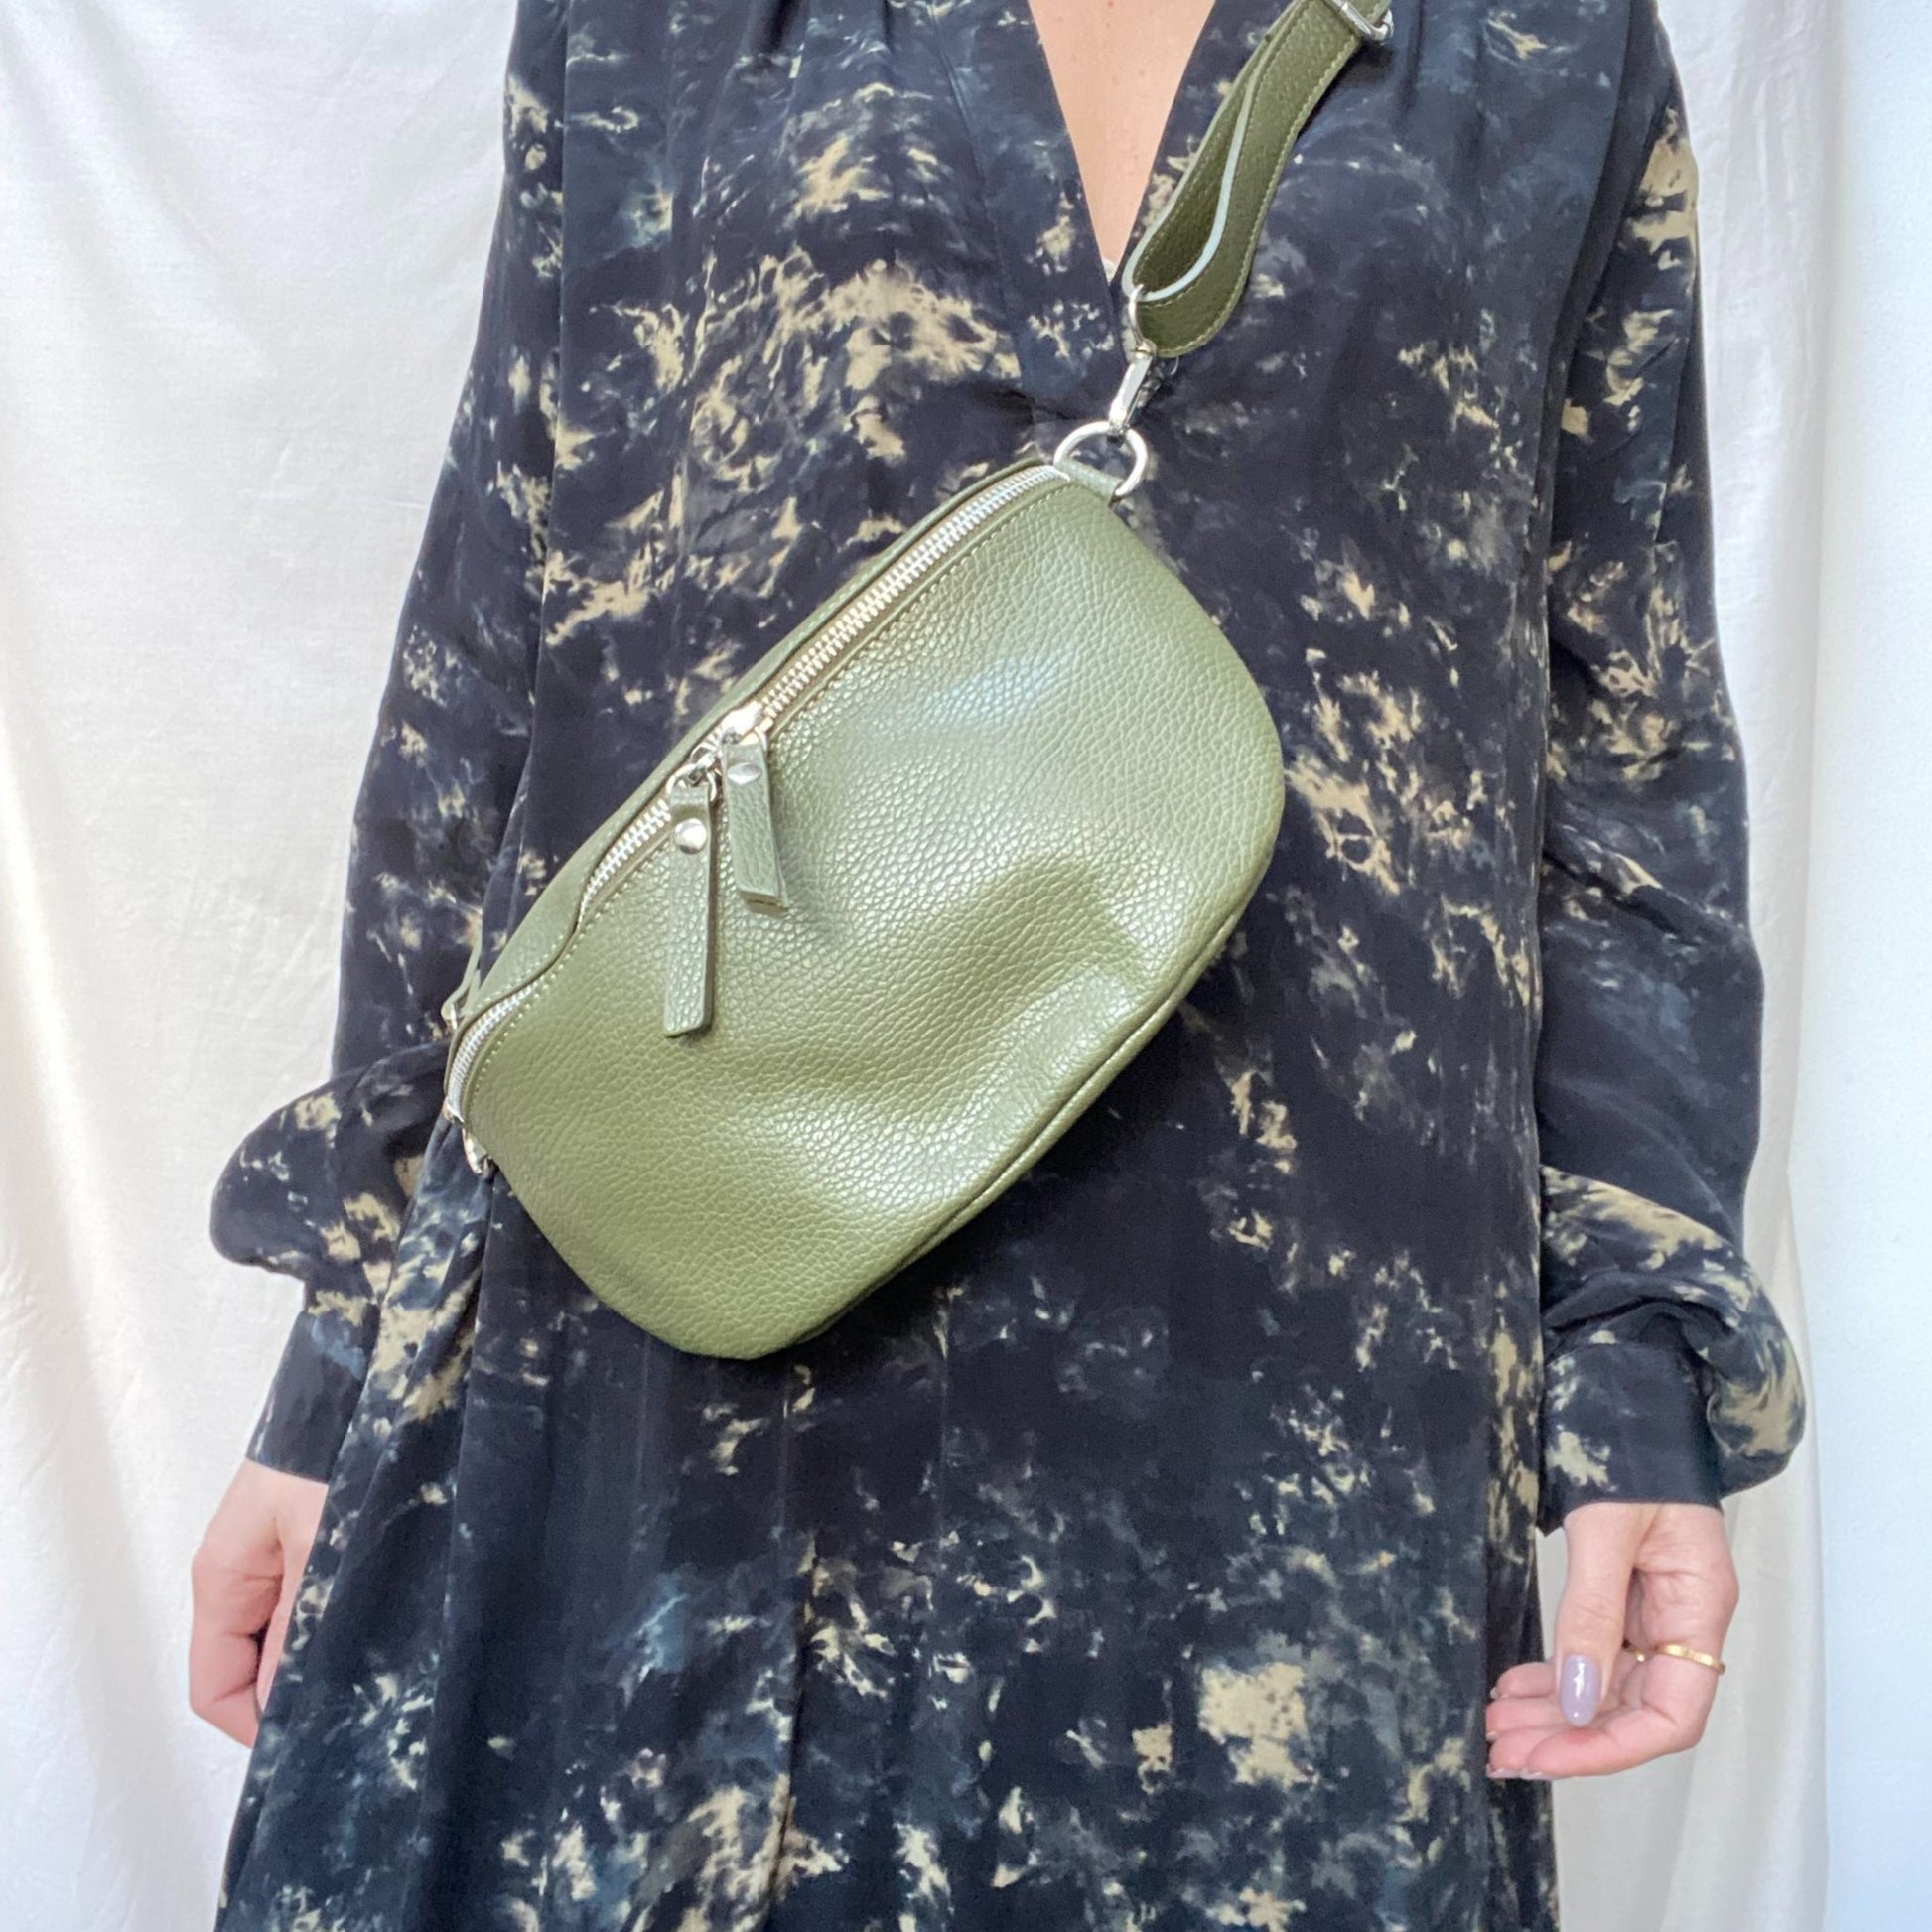 green leather bumbag on woman in dress